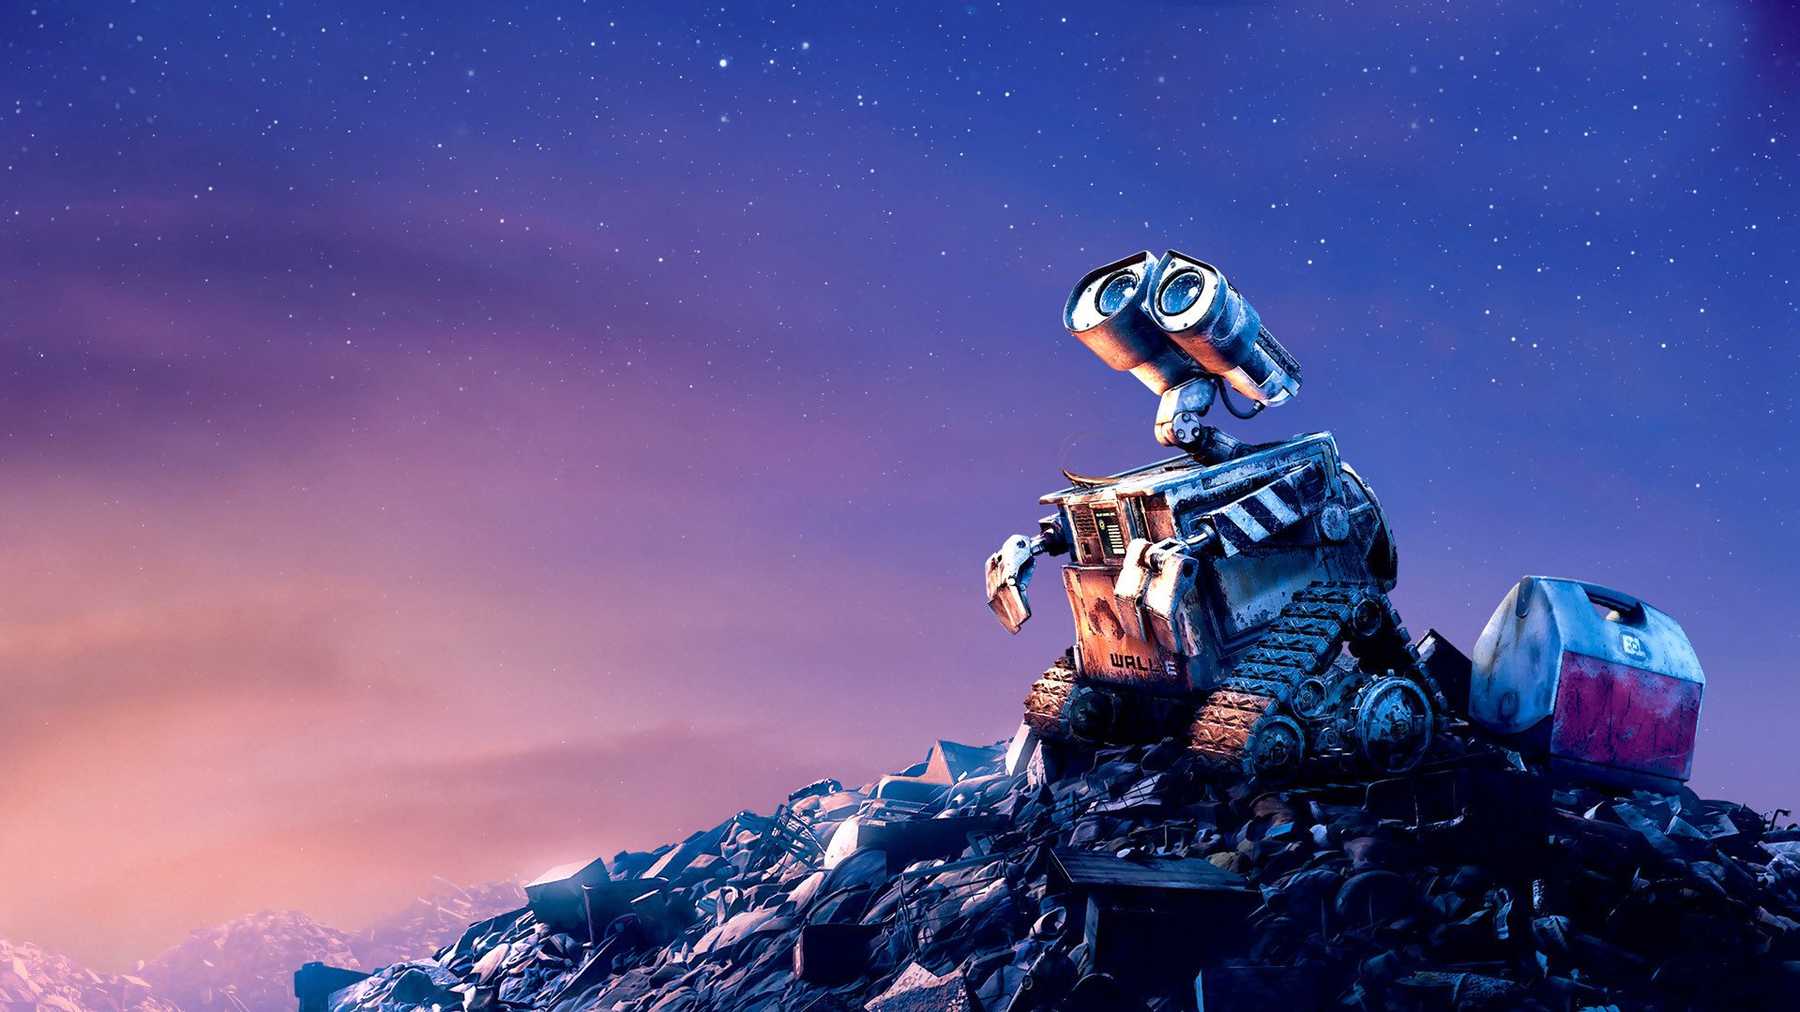 Most Disney Fans Can’t Identify More Than 15/18 of These Movie Foods – Can You? Wall E